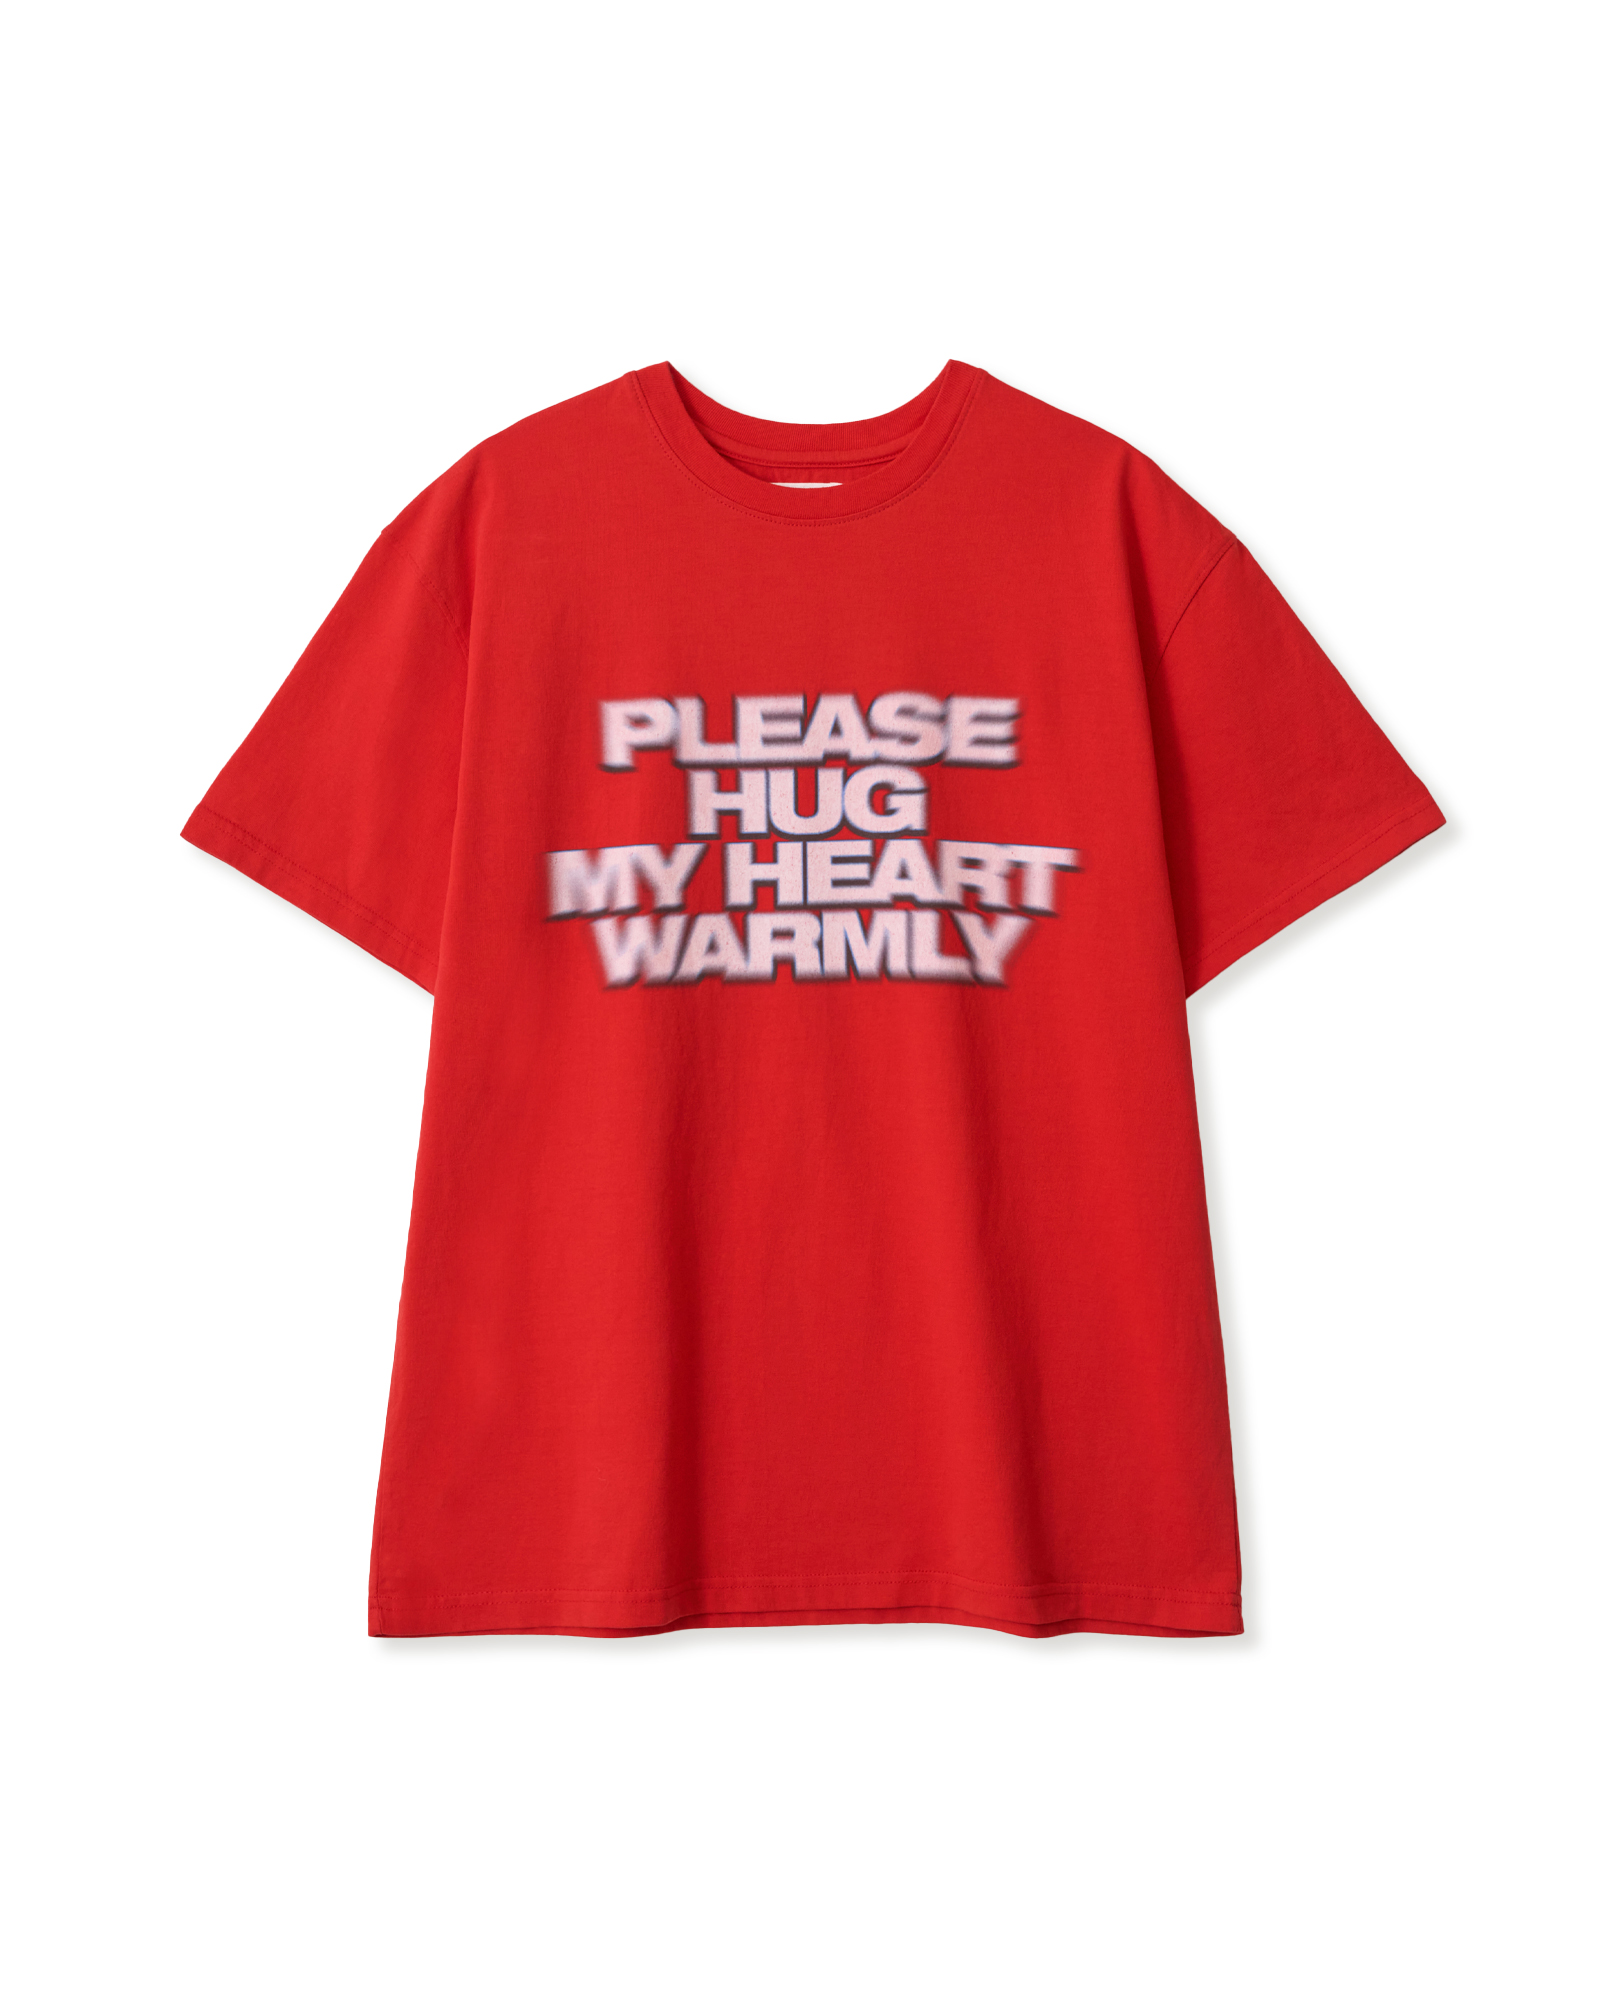 PIT A PAT T-SHIRTS [RED]